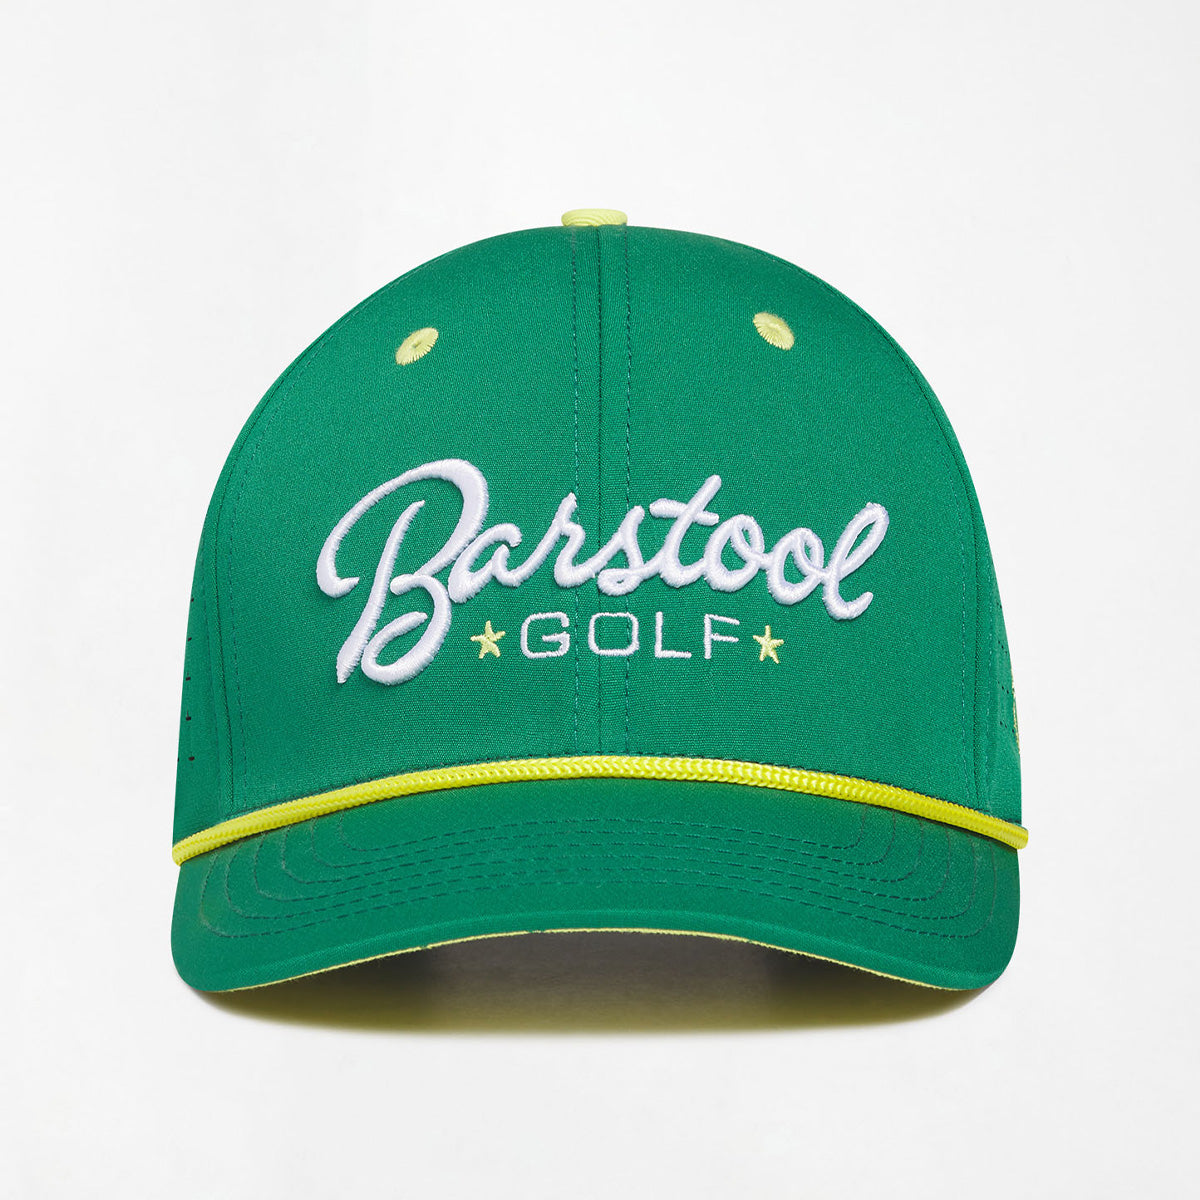 UNRL X Barstool Golf Script Vintage Rope Hat-Hats-Fore Play-Green-Barstool Sports